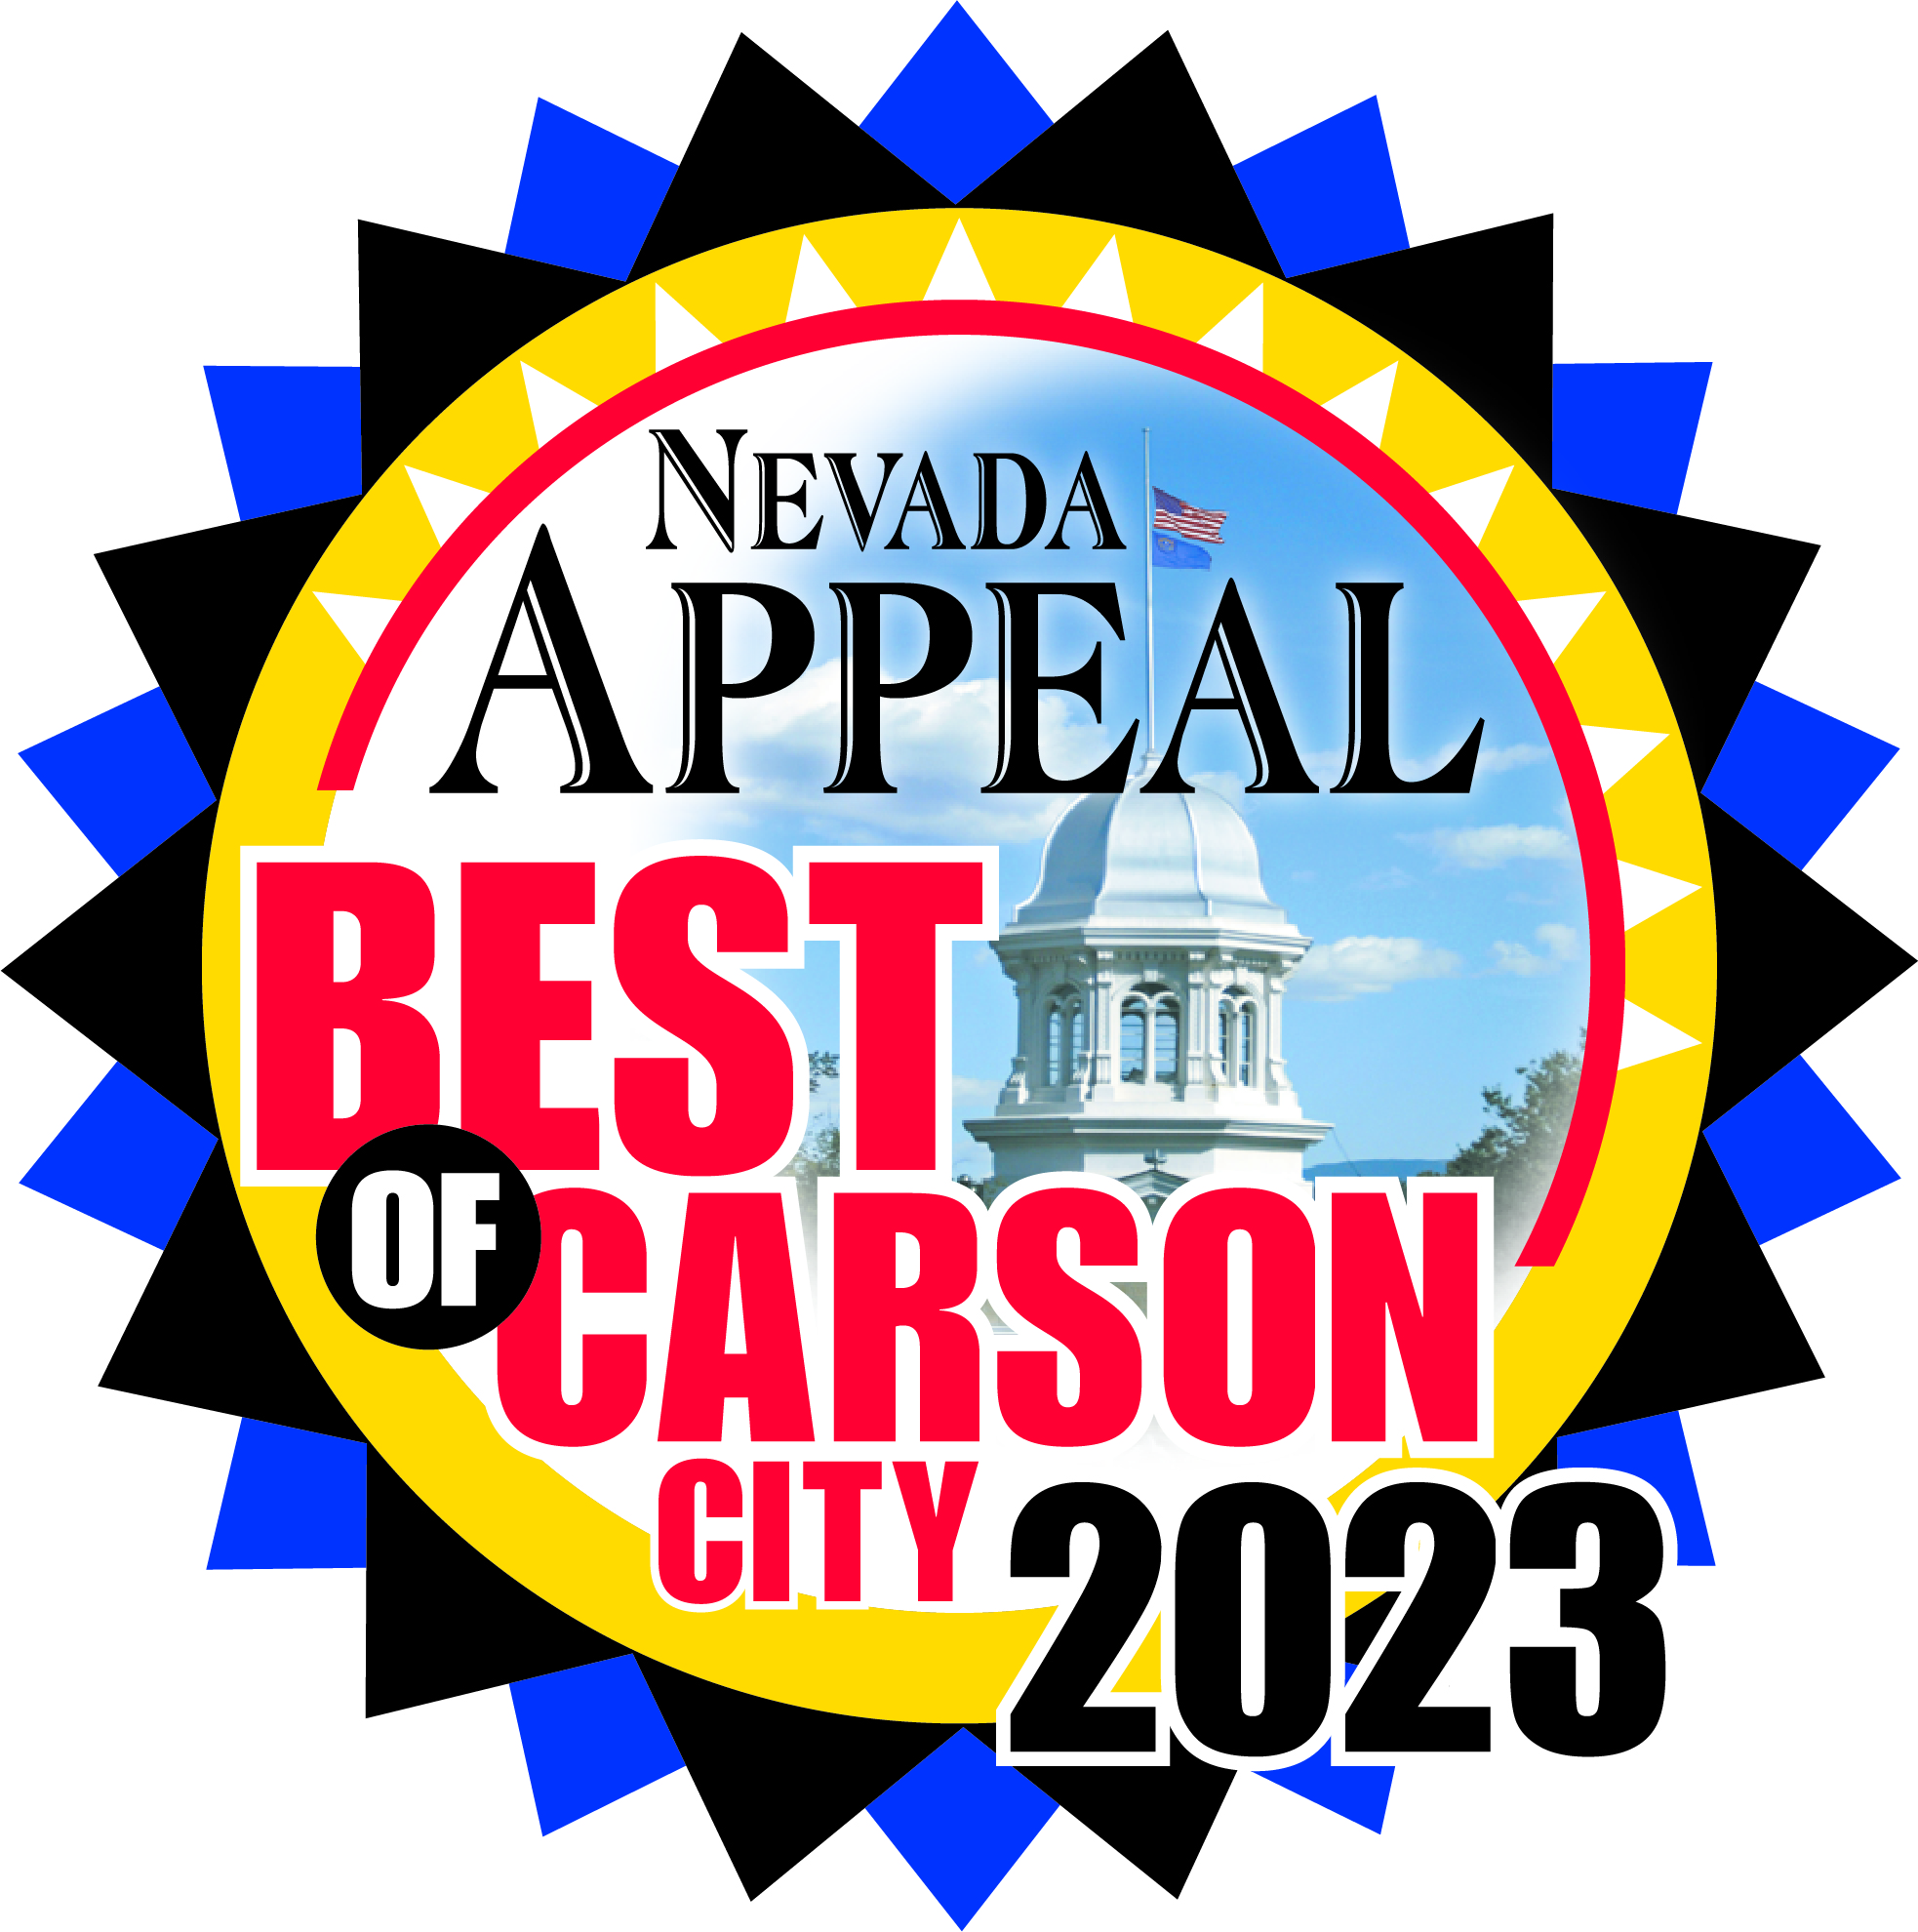 Best of Carson City nominations are now open Serving Carson City for